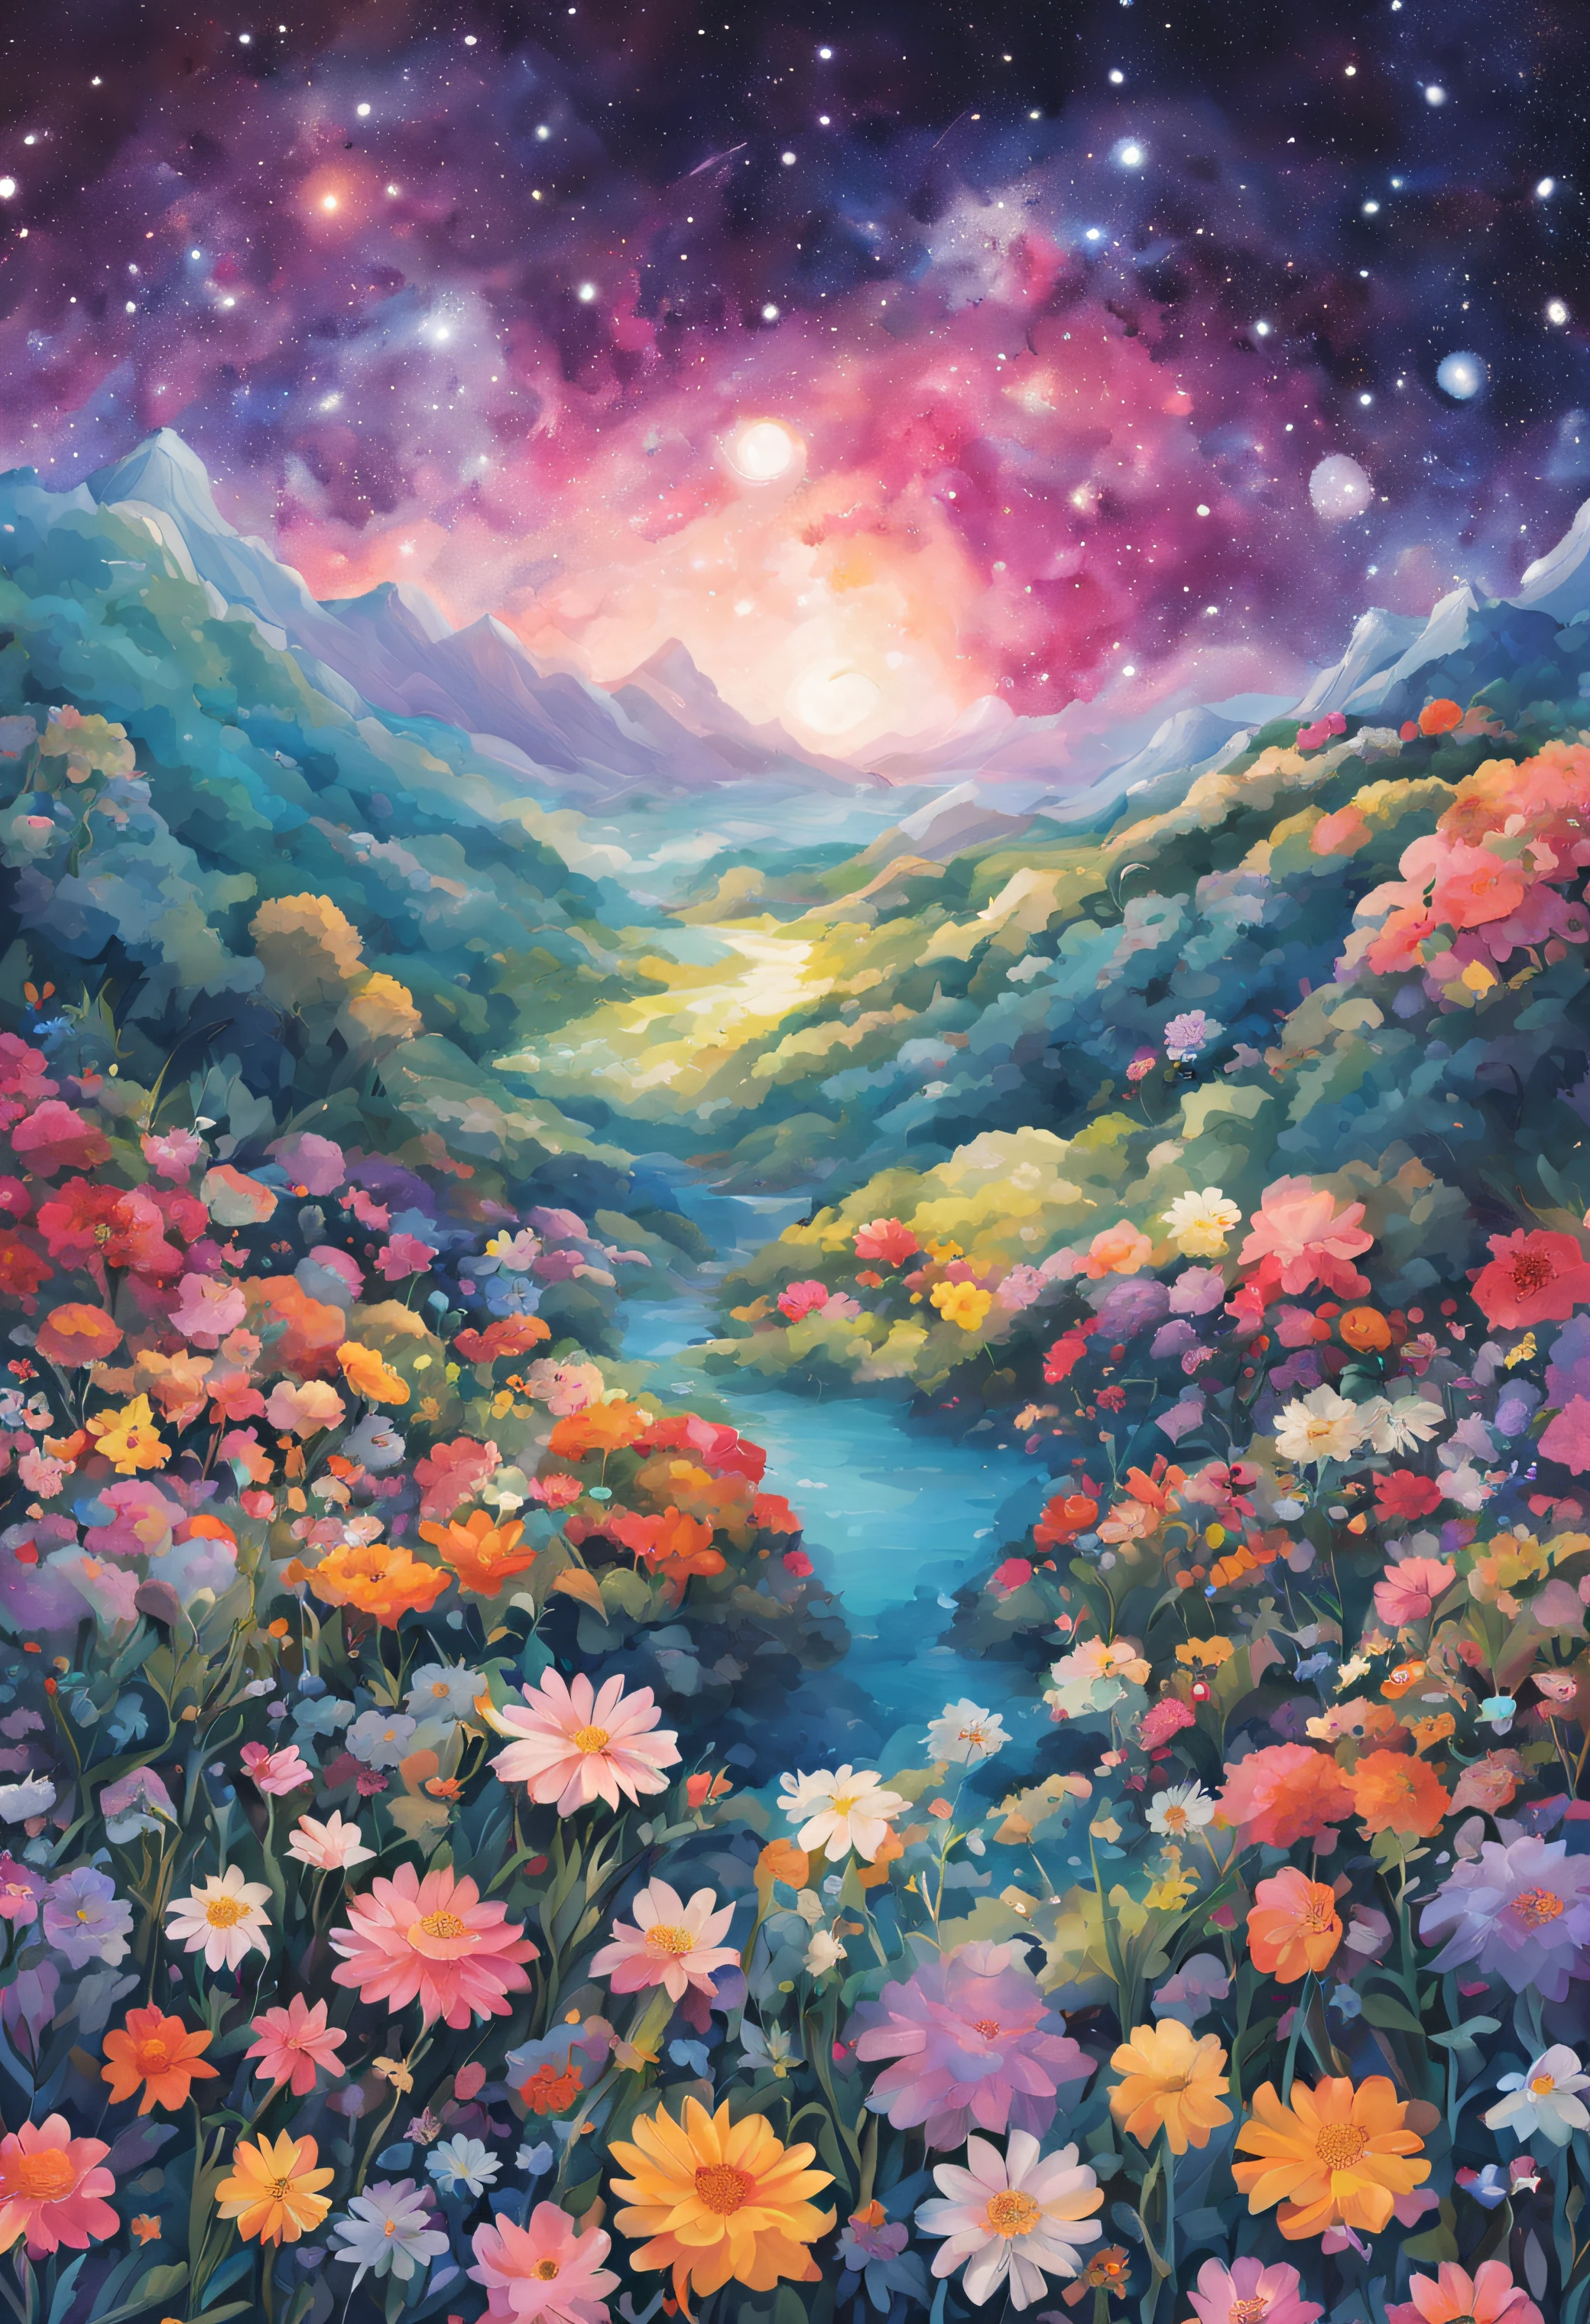 A painting of a mountain landscape with flowers and a river - SeaArt AI